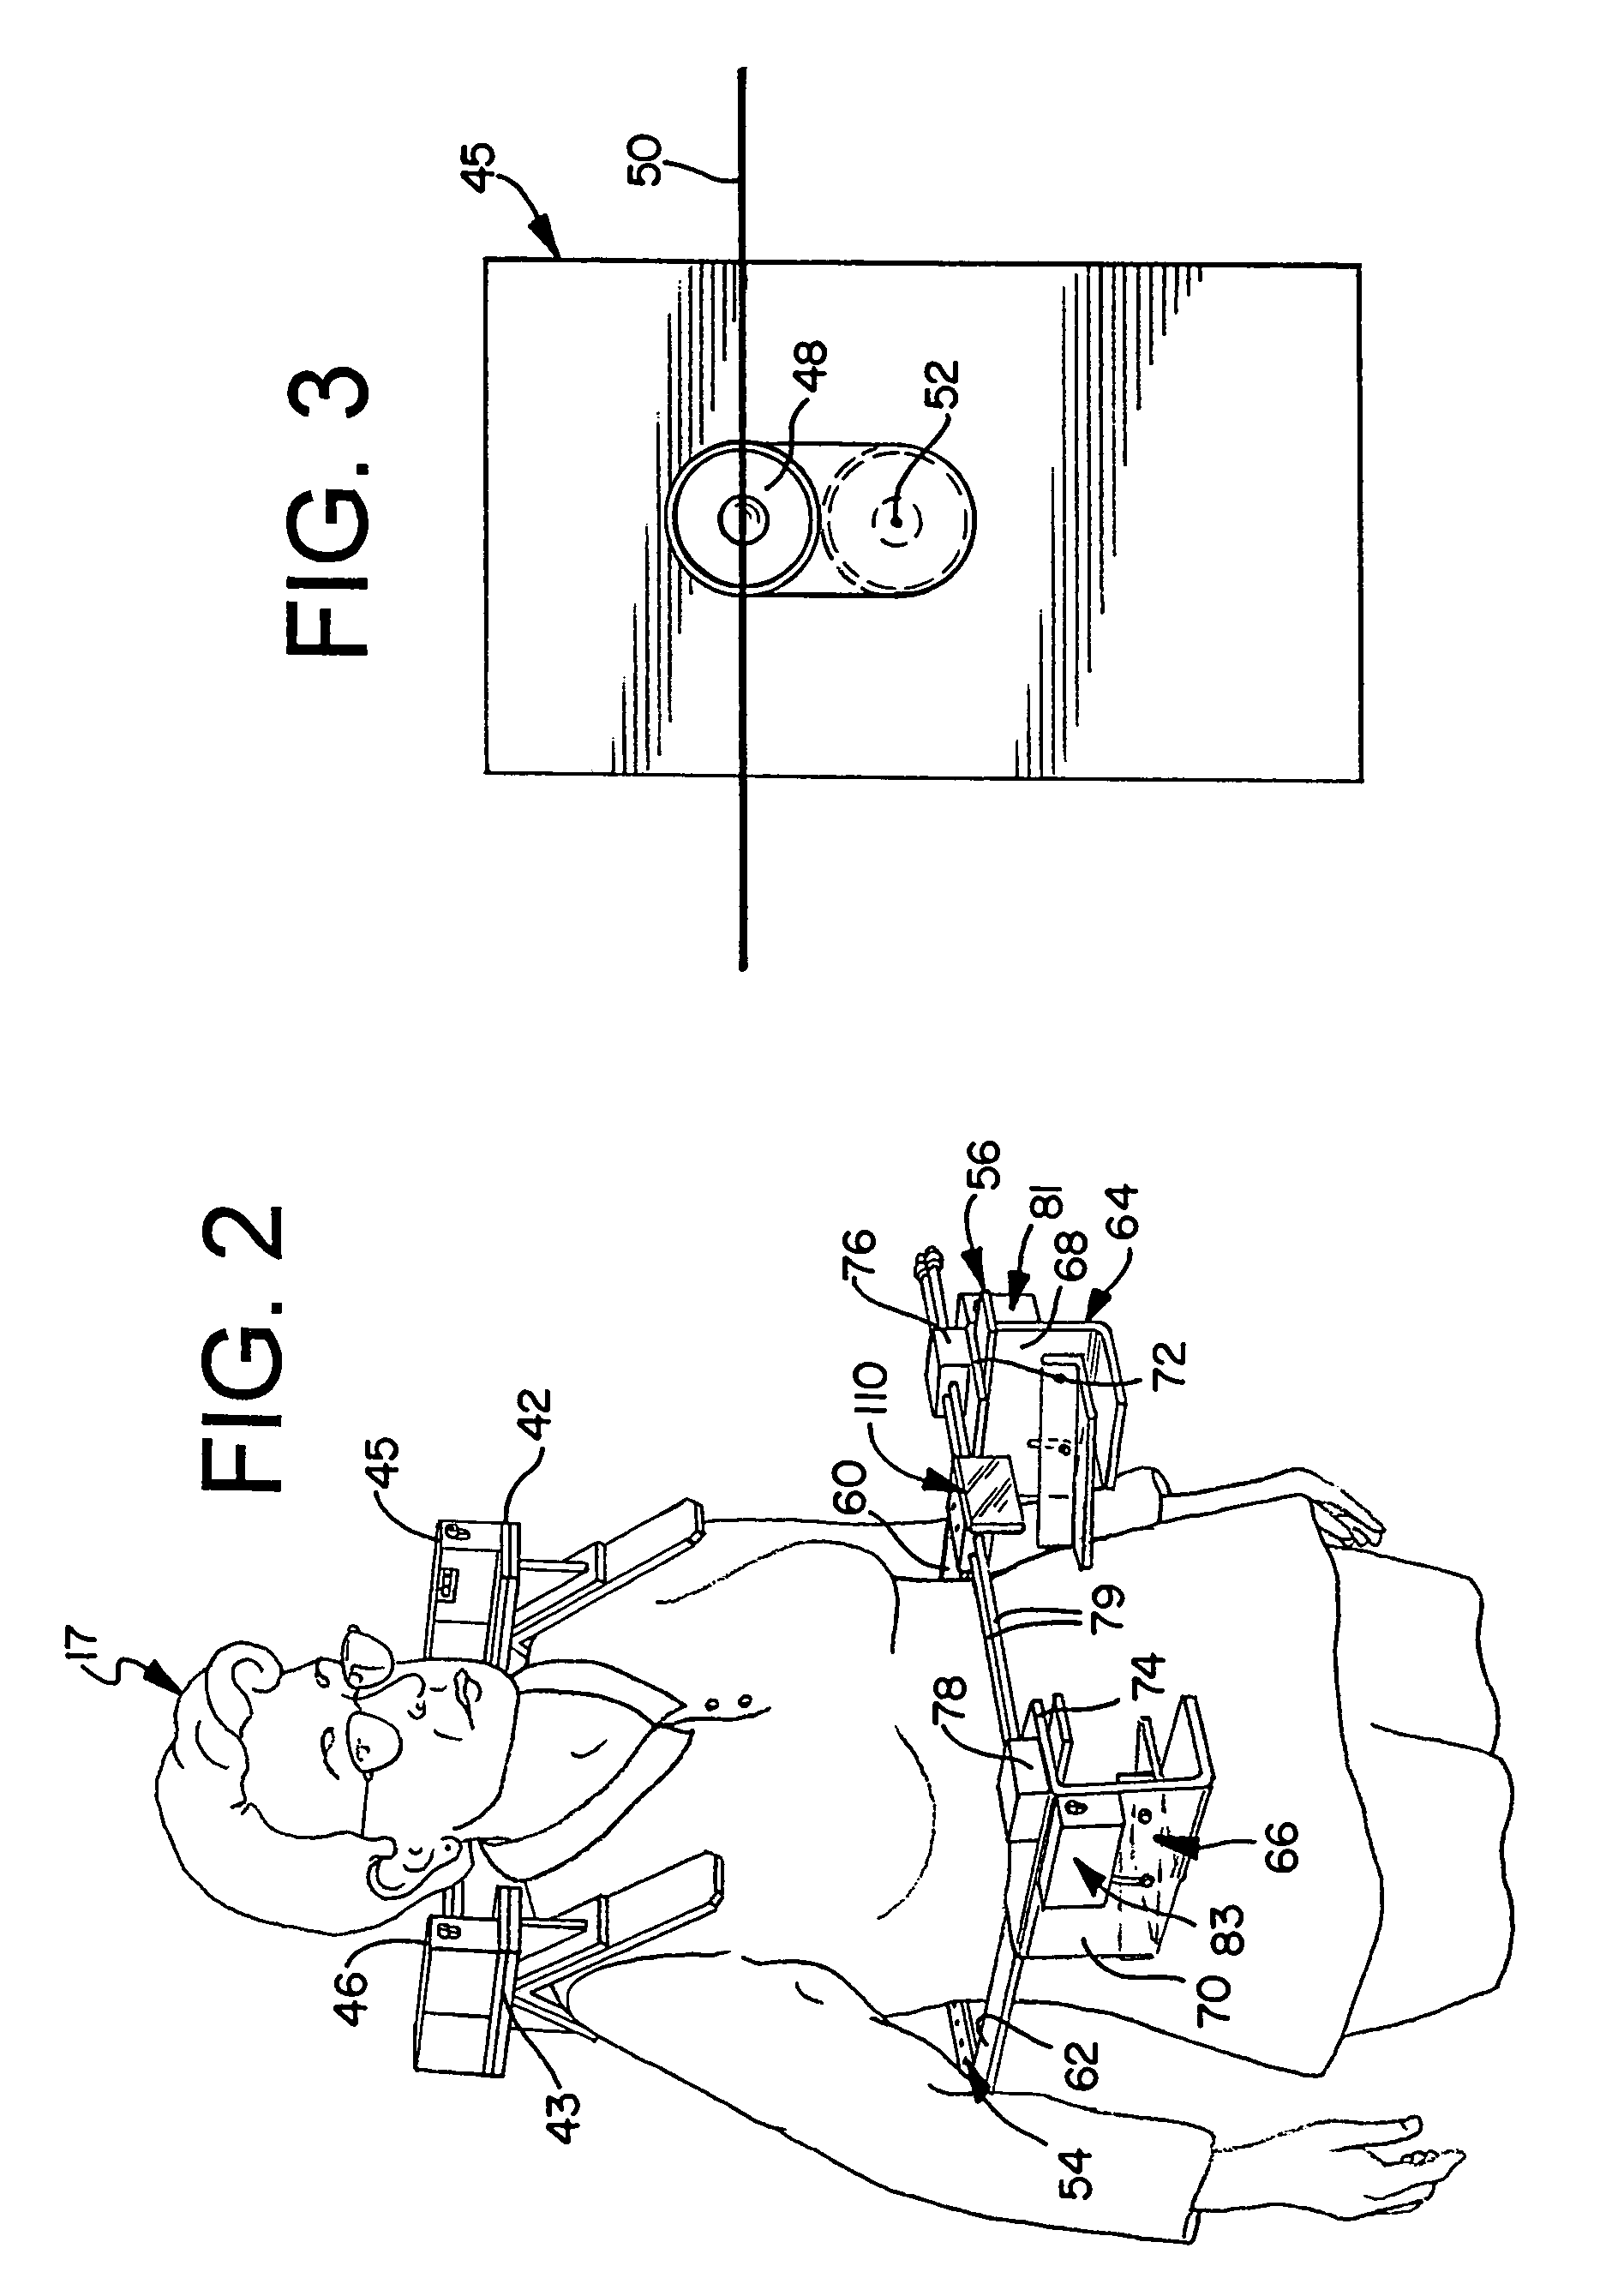 Method and apparatus for measuring spinal distortions